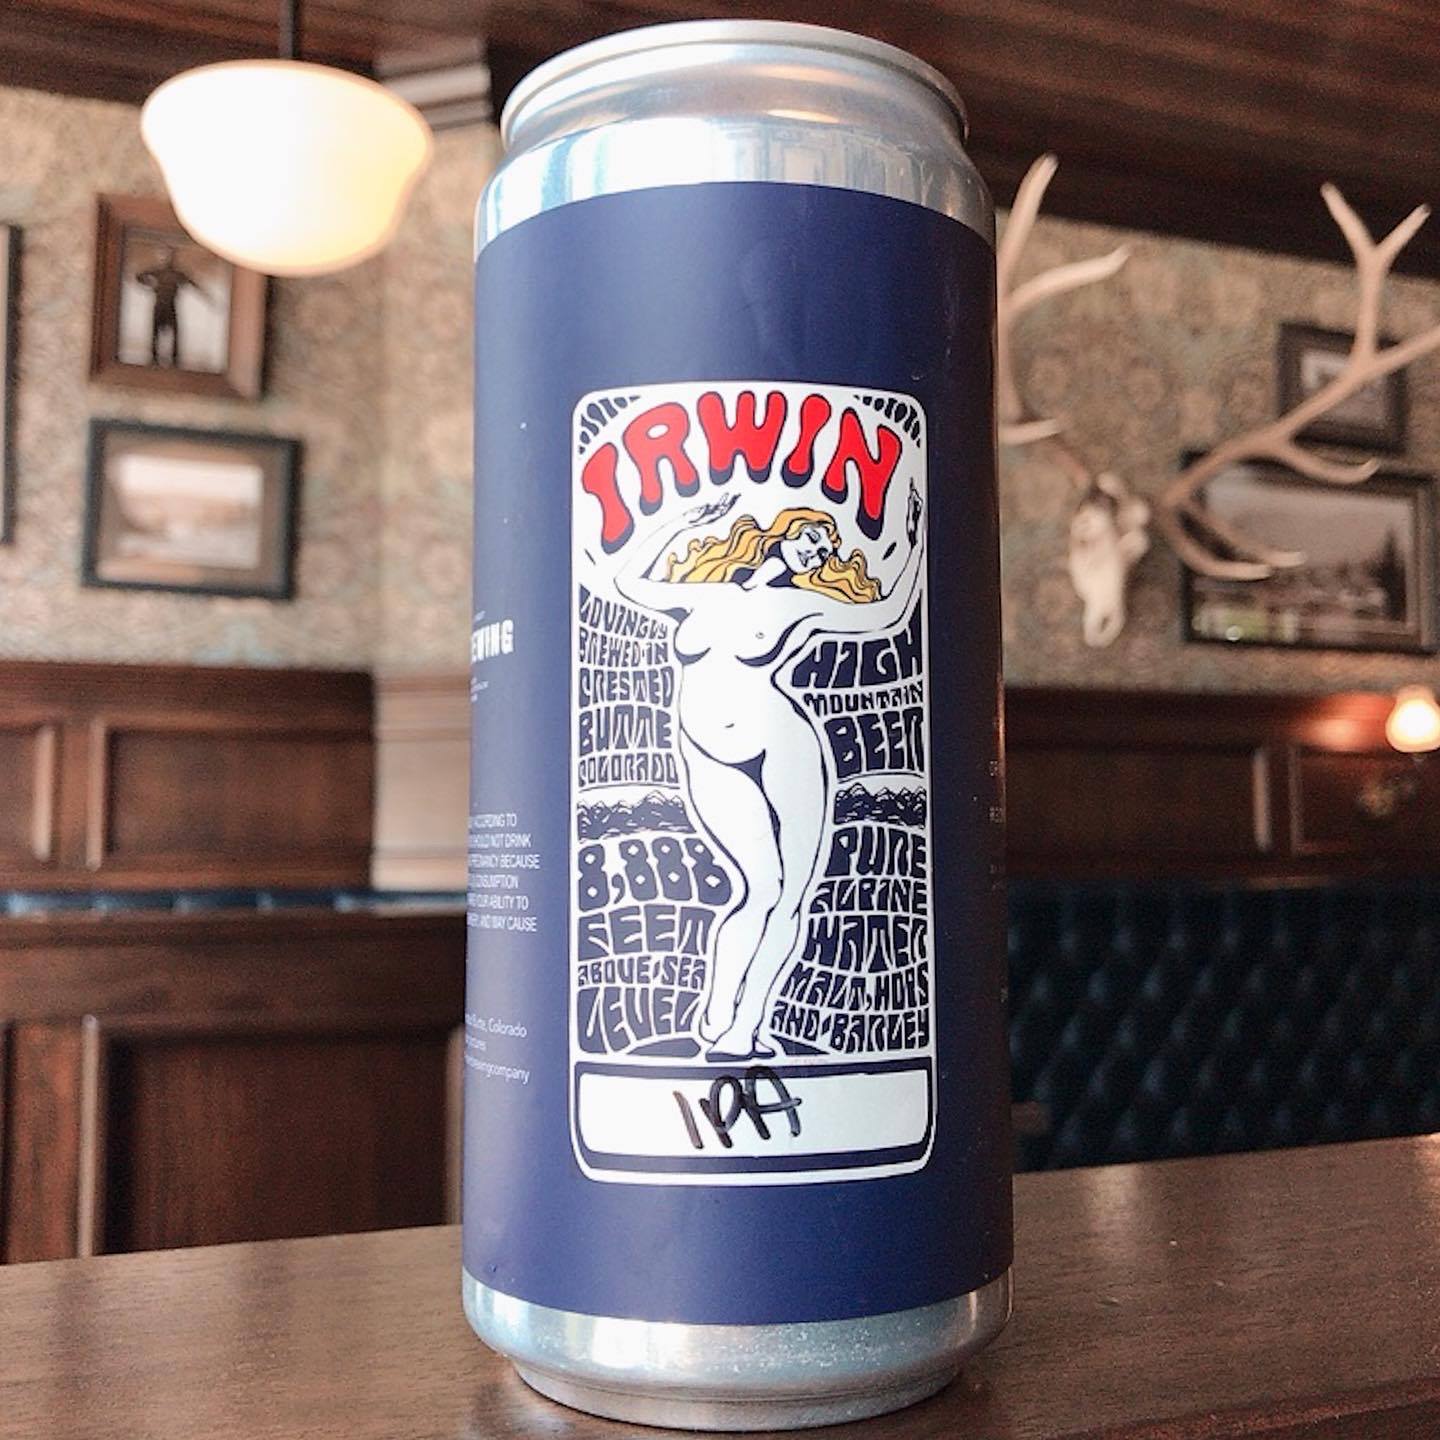 Irwin Brewing Company - Crested Butte CO